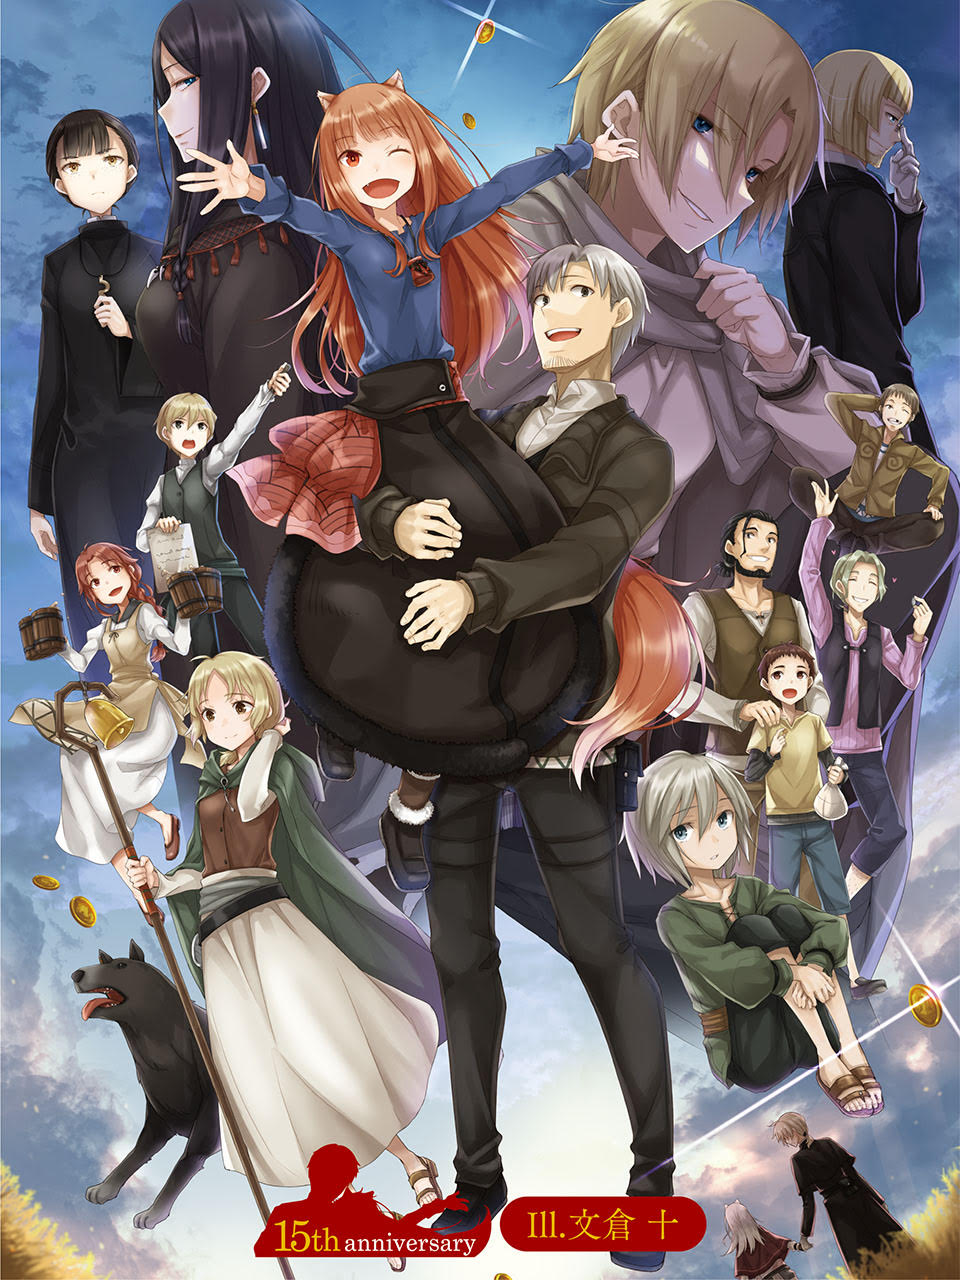 6+boys 6+girls animal_ears anniversary ayakura_juu black_hair blonde_hair border_collie brown_hair character_request coin craft_lawrence dian_rubens dog elsa_schtingheim enekk eve_bolan everyone facial_hair fang fran_vonely fur_trim goatee helena_(spice_and_wolf) highres holding_hands holding_person holo hugging_own_legs jacket long_hair long_sleeves marc_cole multiple_boys multiple_girls myuri_(spice_and_wolf) nora_arento official_art one_eye_closed open_mouth outstretched_arms pouch priestess red_eyes shepherd shepherd's_crook short_hair skirt sky smile spice_and_wolf spread_arms tail tankard tote_col weiz wolf_ears wolf_girl wolf_tail